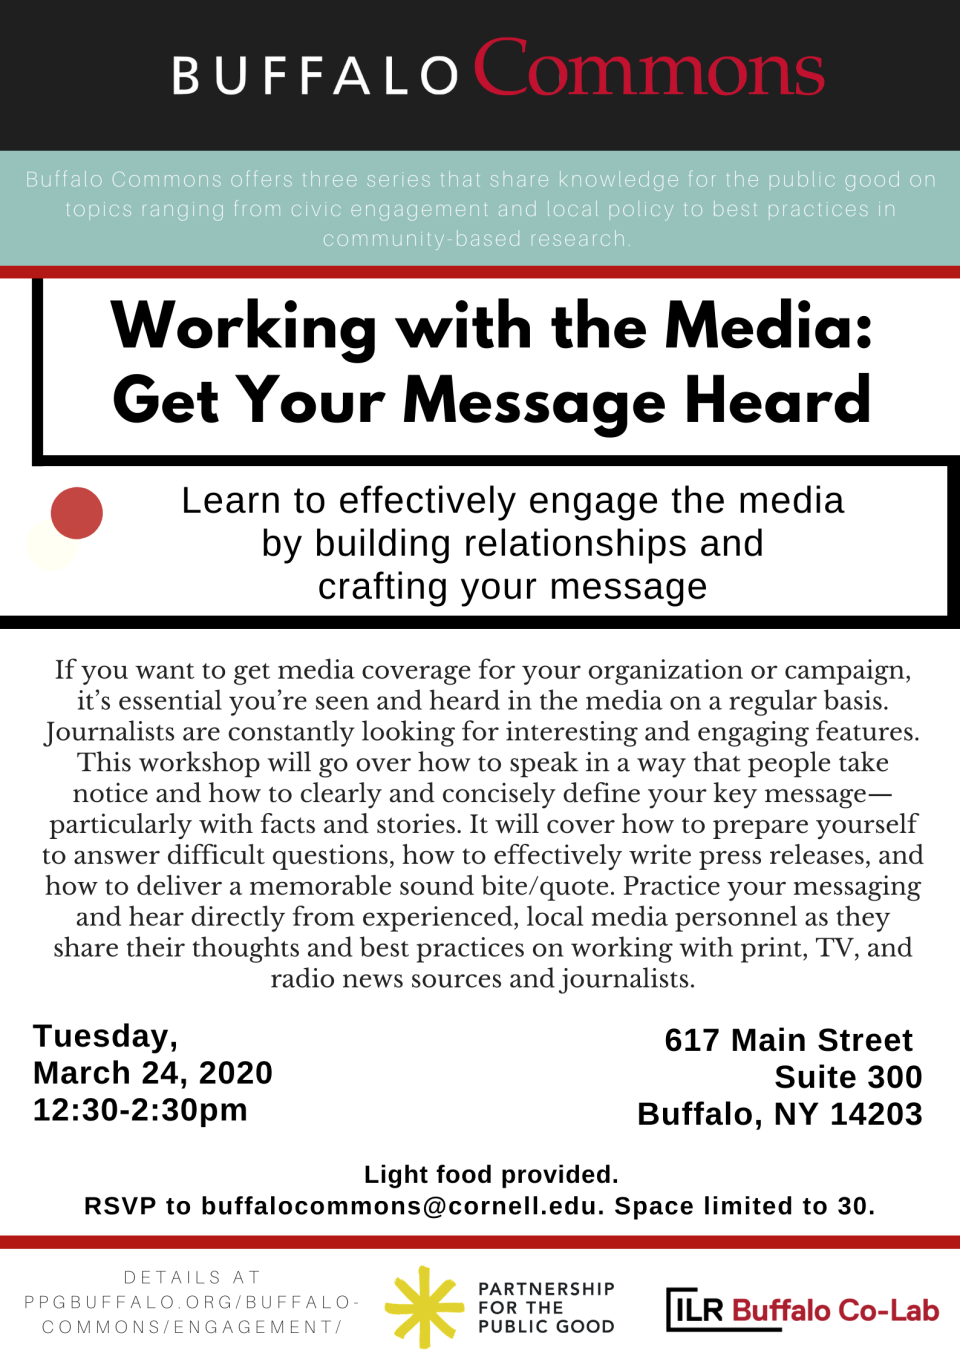 CANCELLED Buffalo Commons Workshop: Working with the Media: Get Your Message Heard